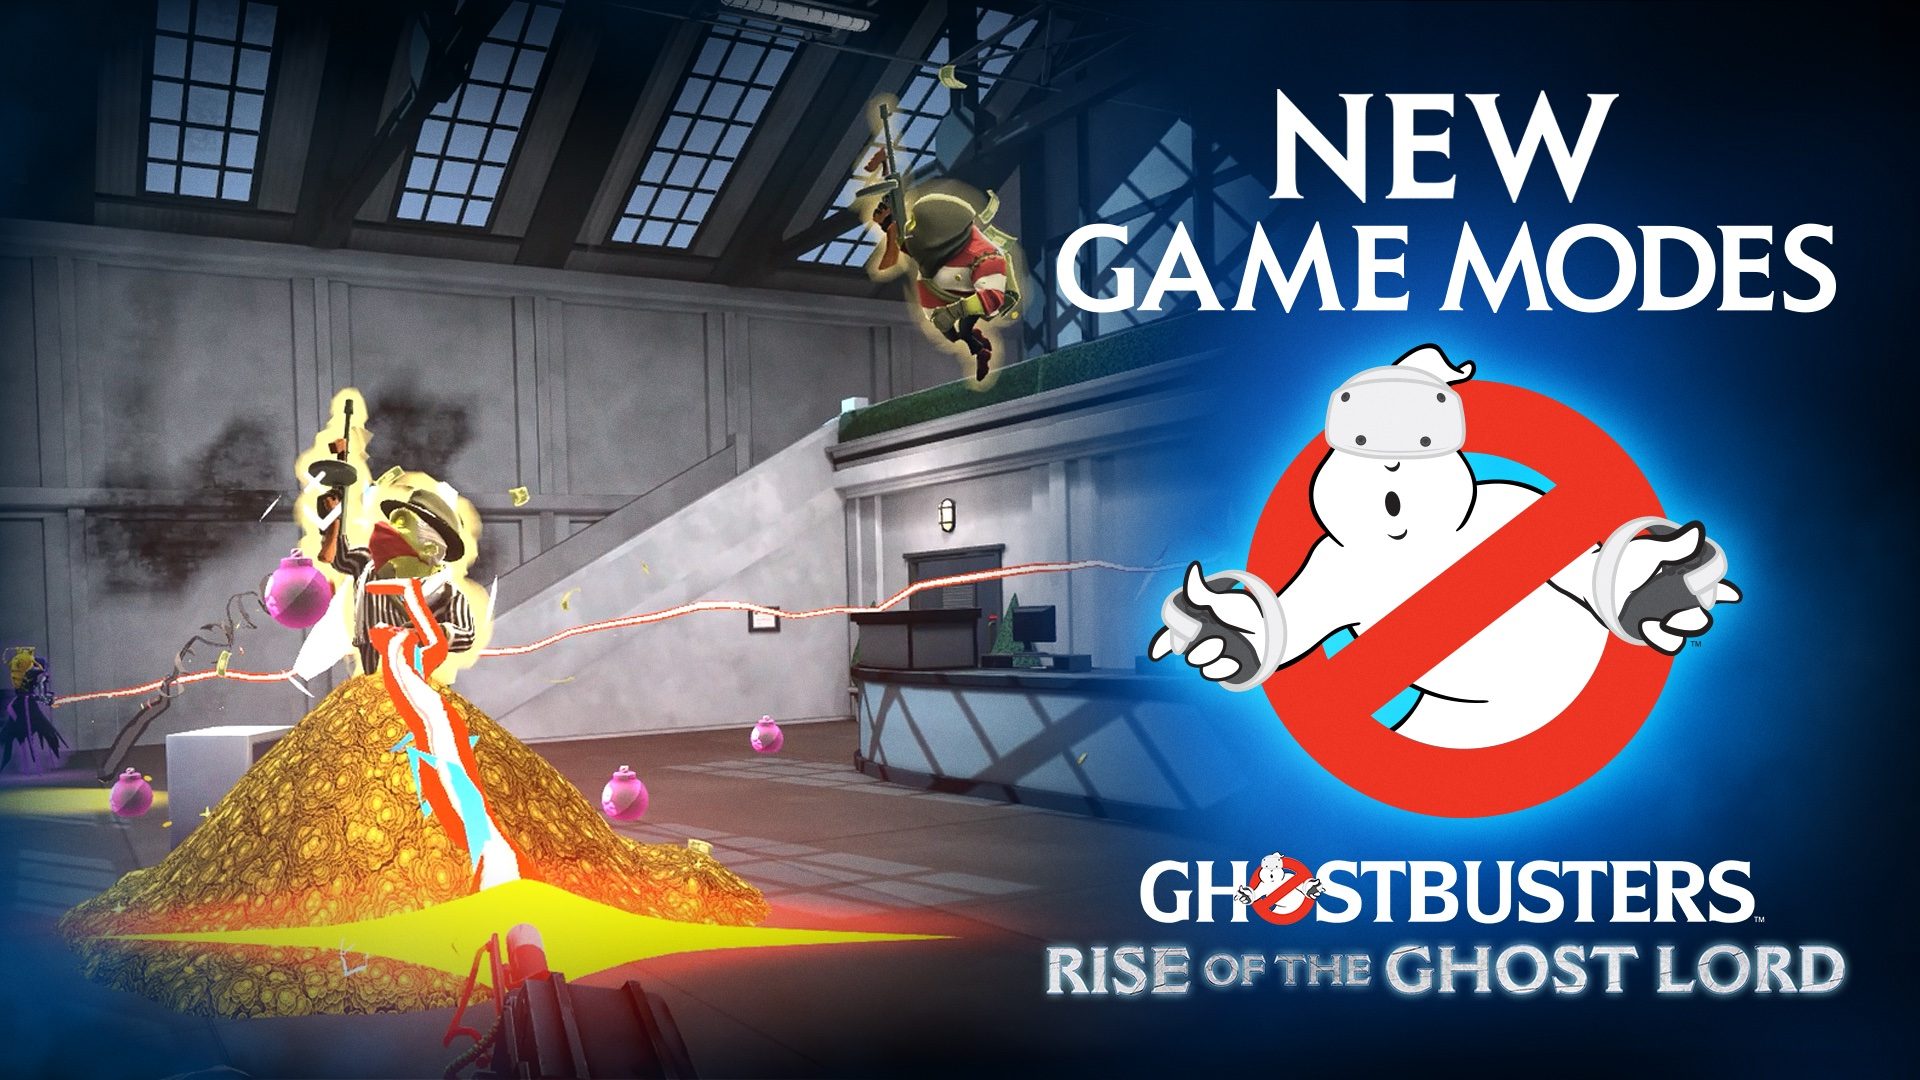 Rise of the Ghost Lord introduces two free game modes – PlayStation.Blog